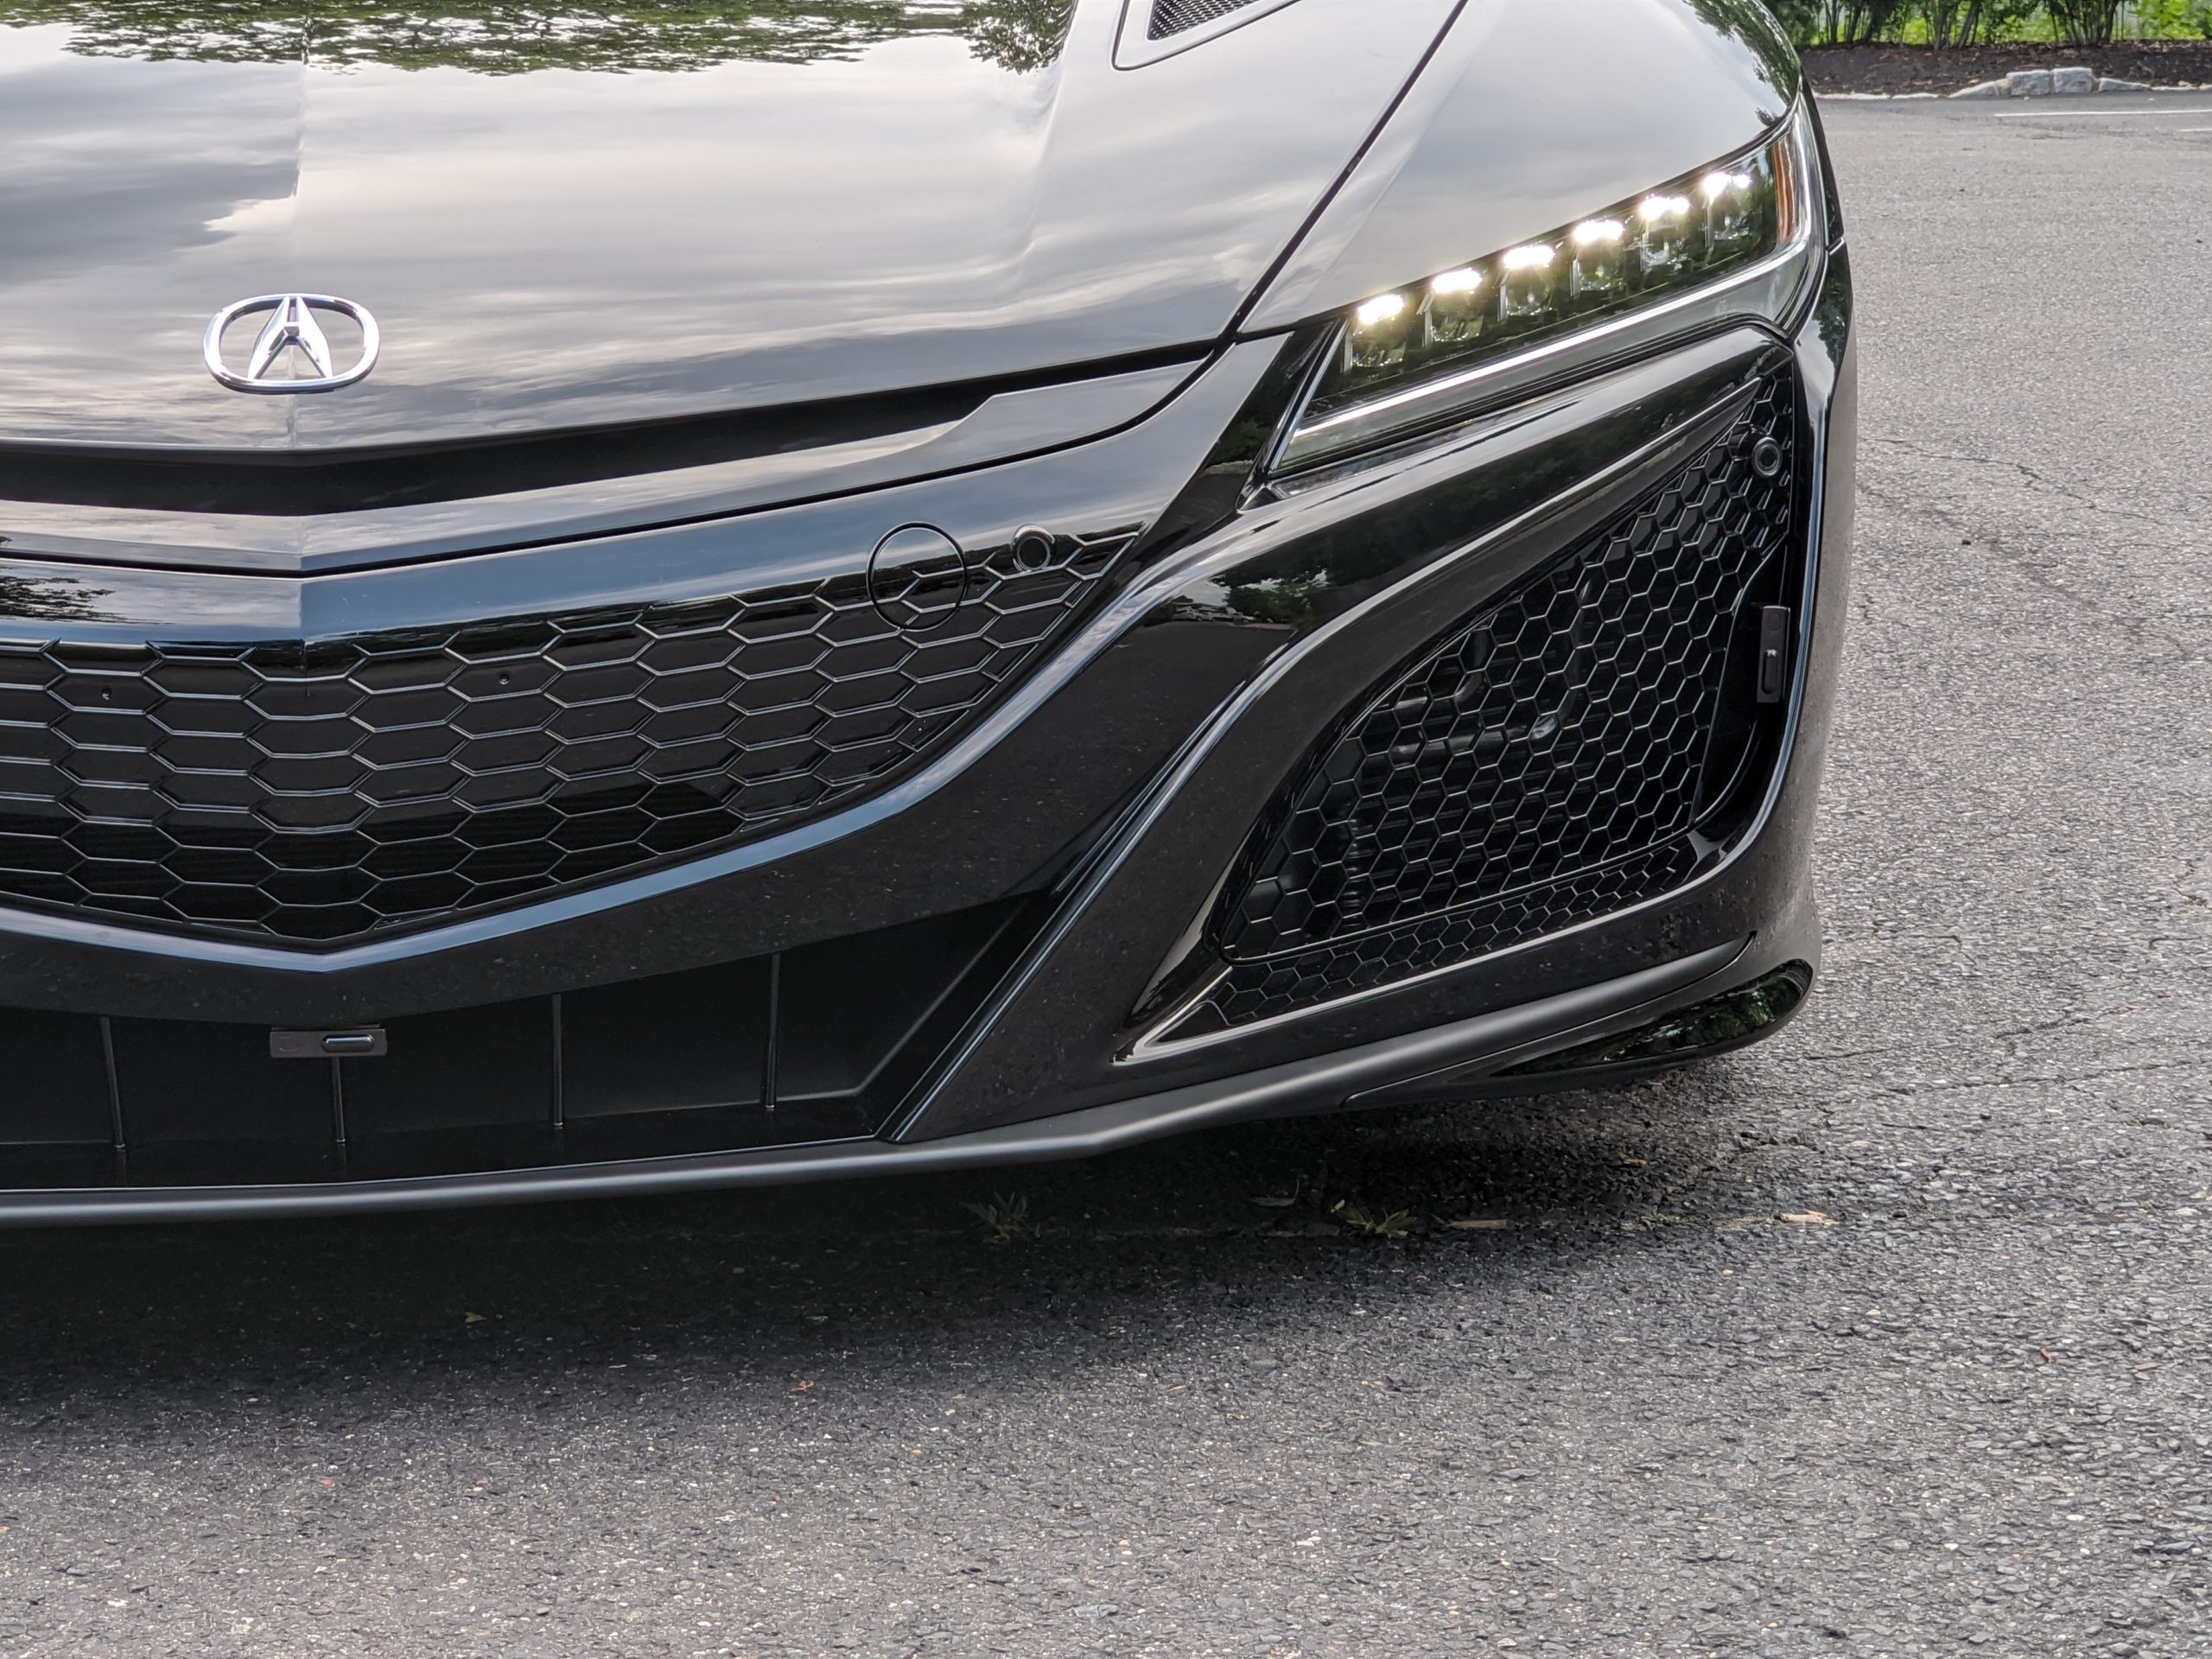 K40 Laser jammers on a 2020 Acura NSX